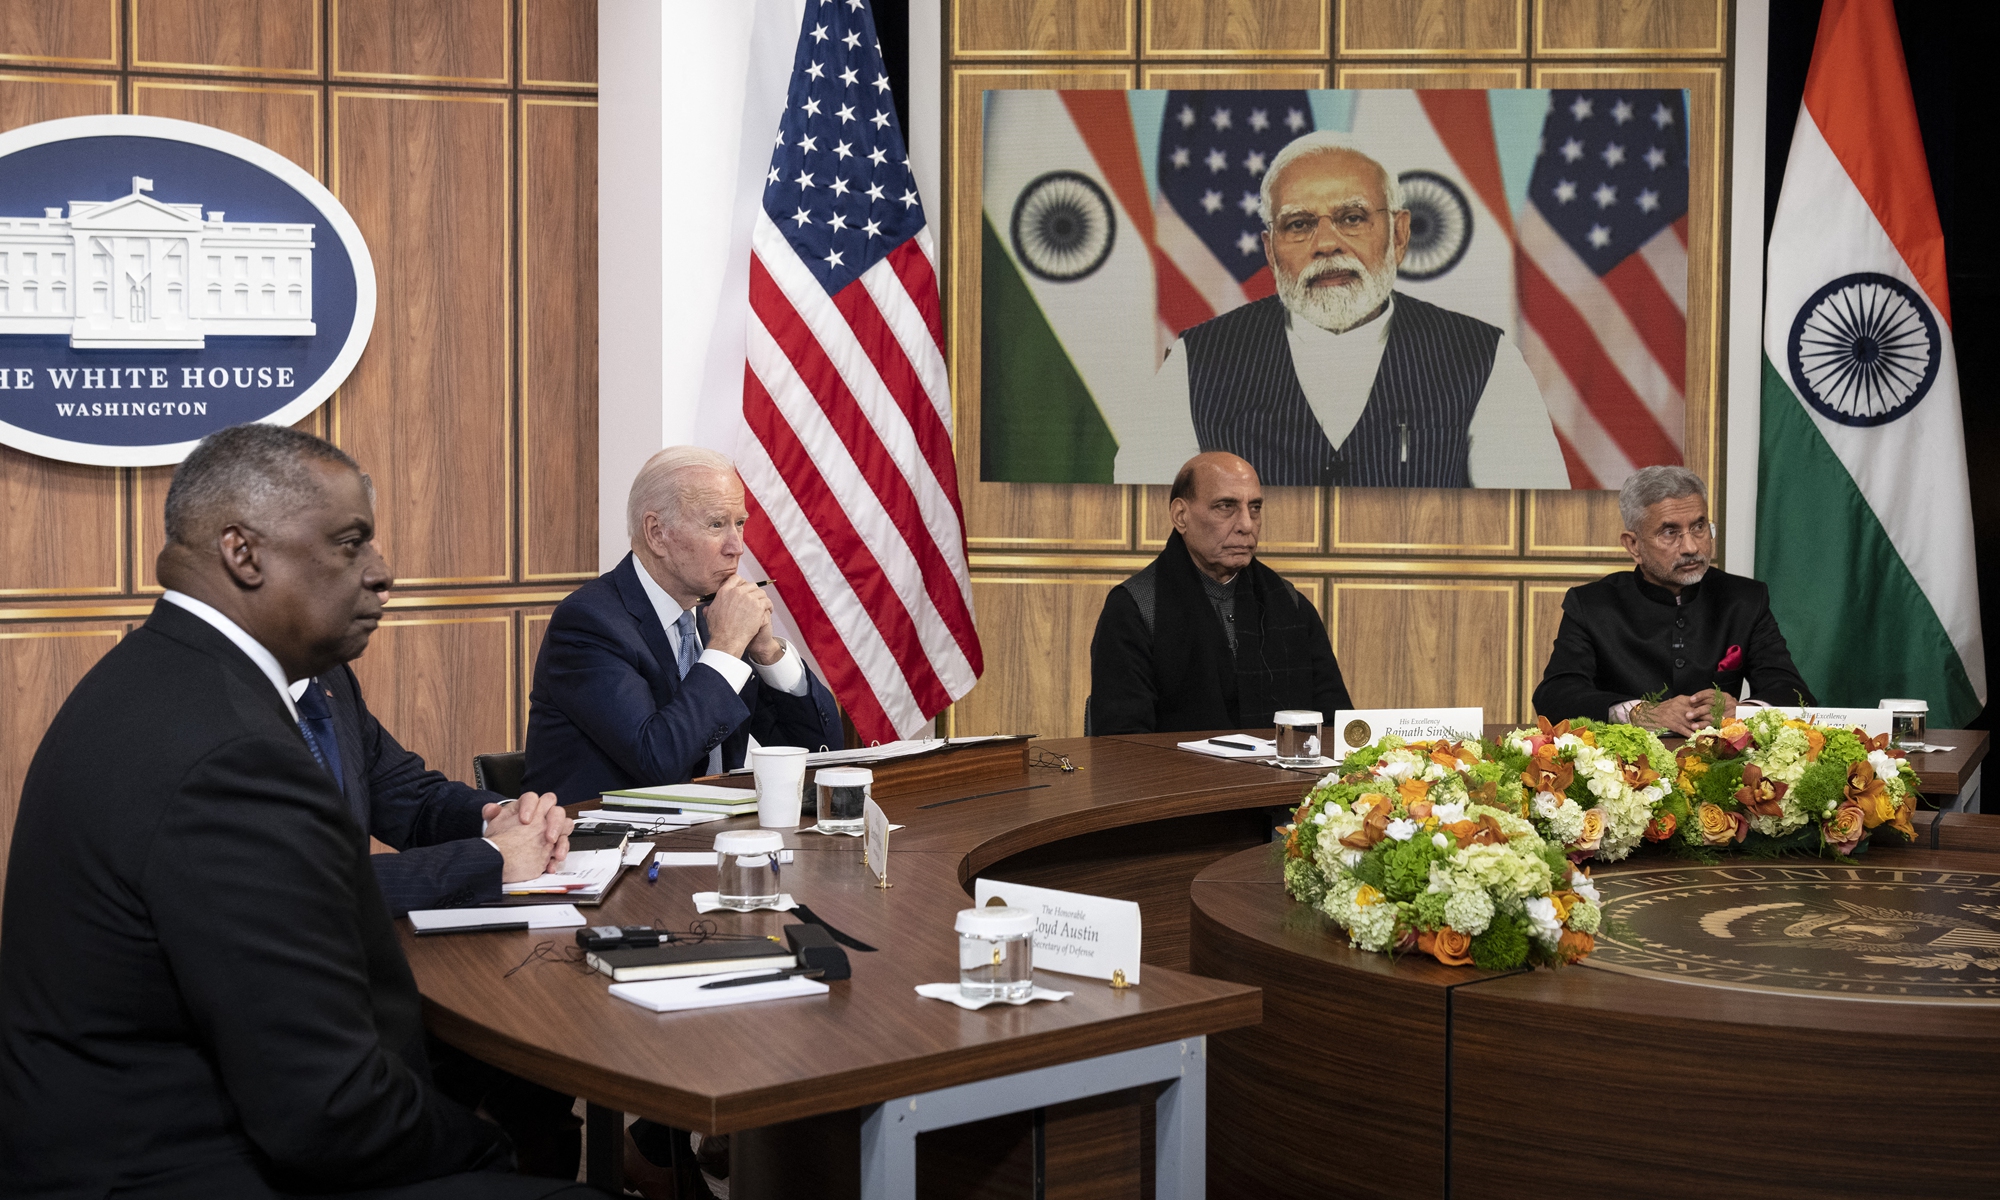 (From left to right) US Defense Secretary Lloyd Austin, US President Joe Biden, Indian Minister of Defense Rajnath Singh, and Indian External Affairs Minister Subrahmanyam Jaishankar listen as Prime Minister of India Narendra Modi (on screen) speaks during a virtual meeting in the South Court Auditorium of the White House complex April 22, 2022 in Washington, DC.Photo: AFP